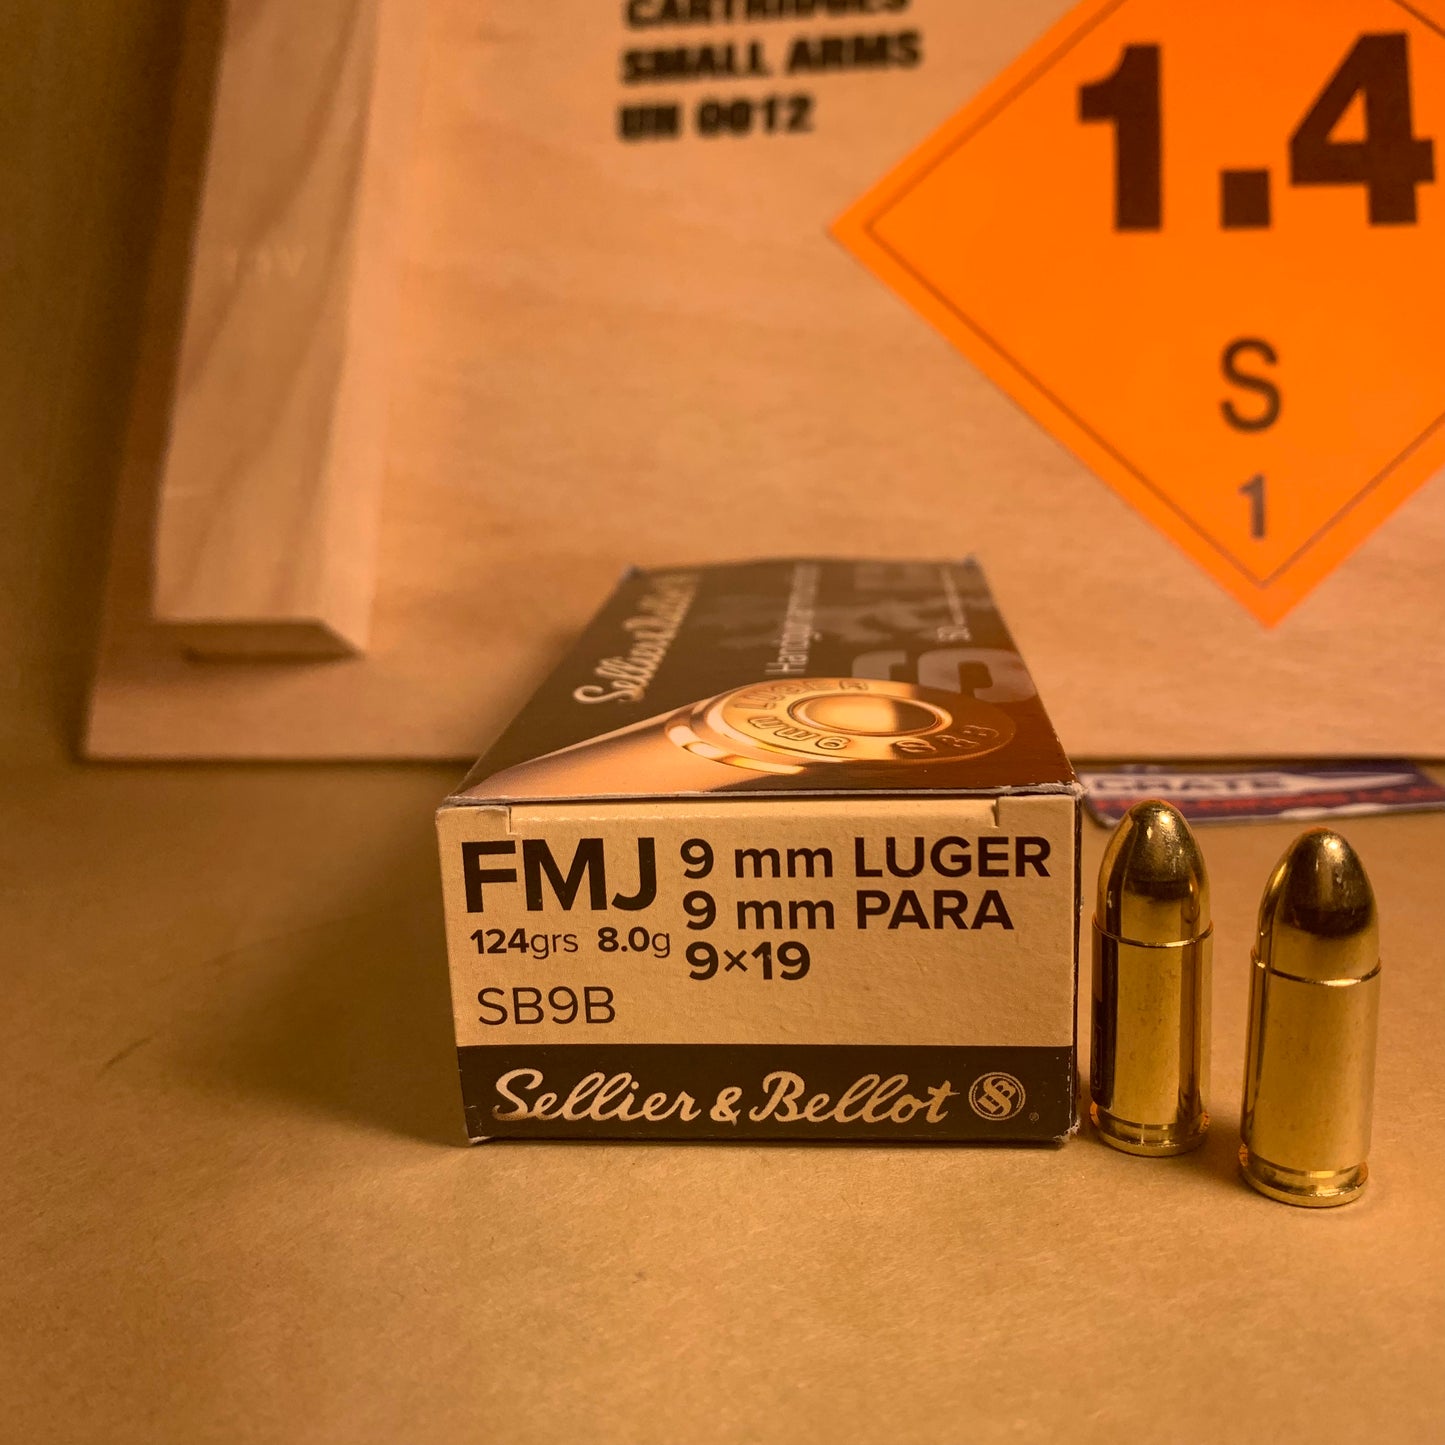 50 Round Box Sellier & Bellot 9mm Luger Ammo 124gr FMJ - SB9B